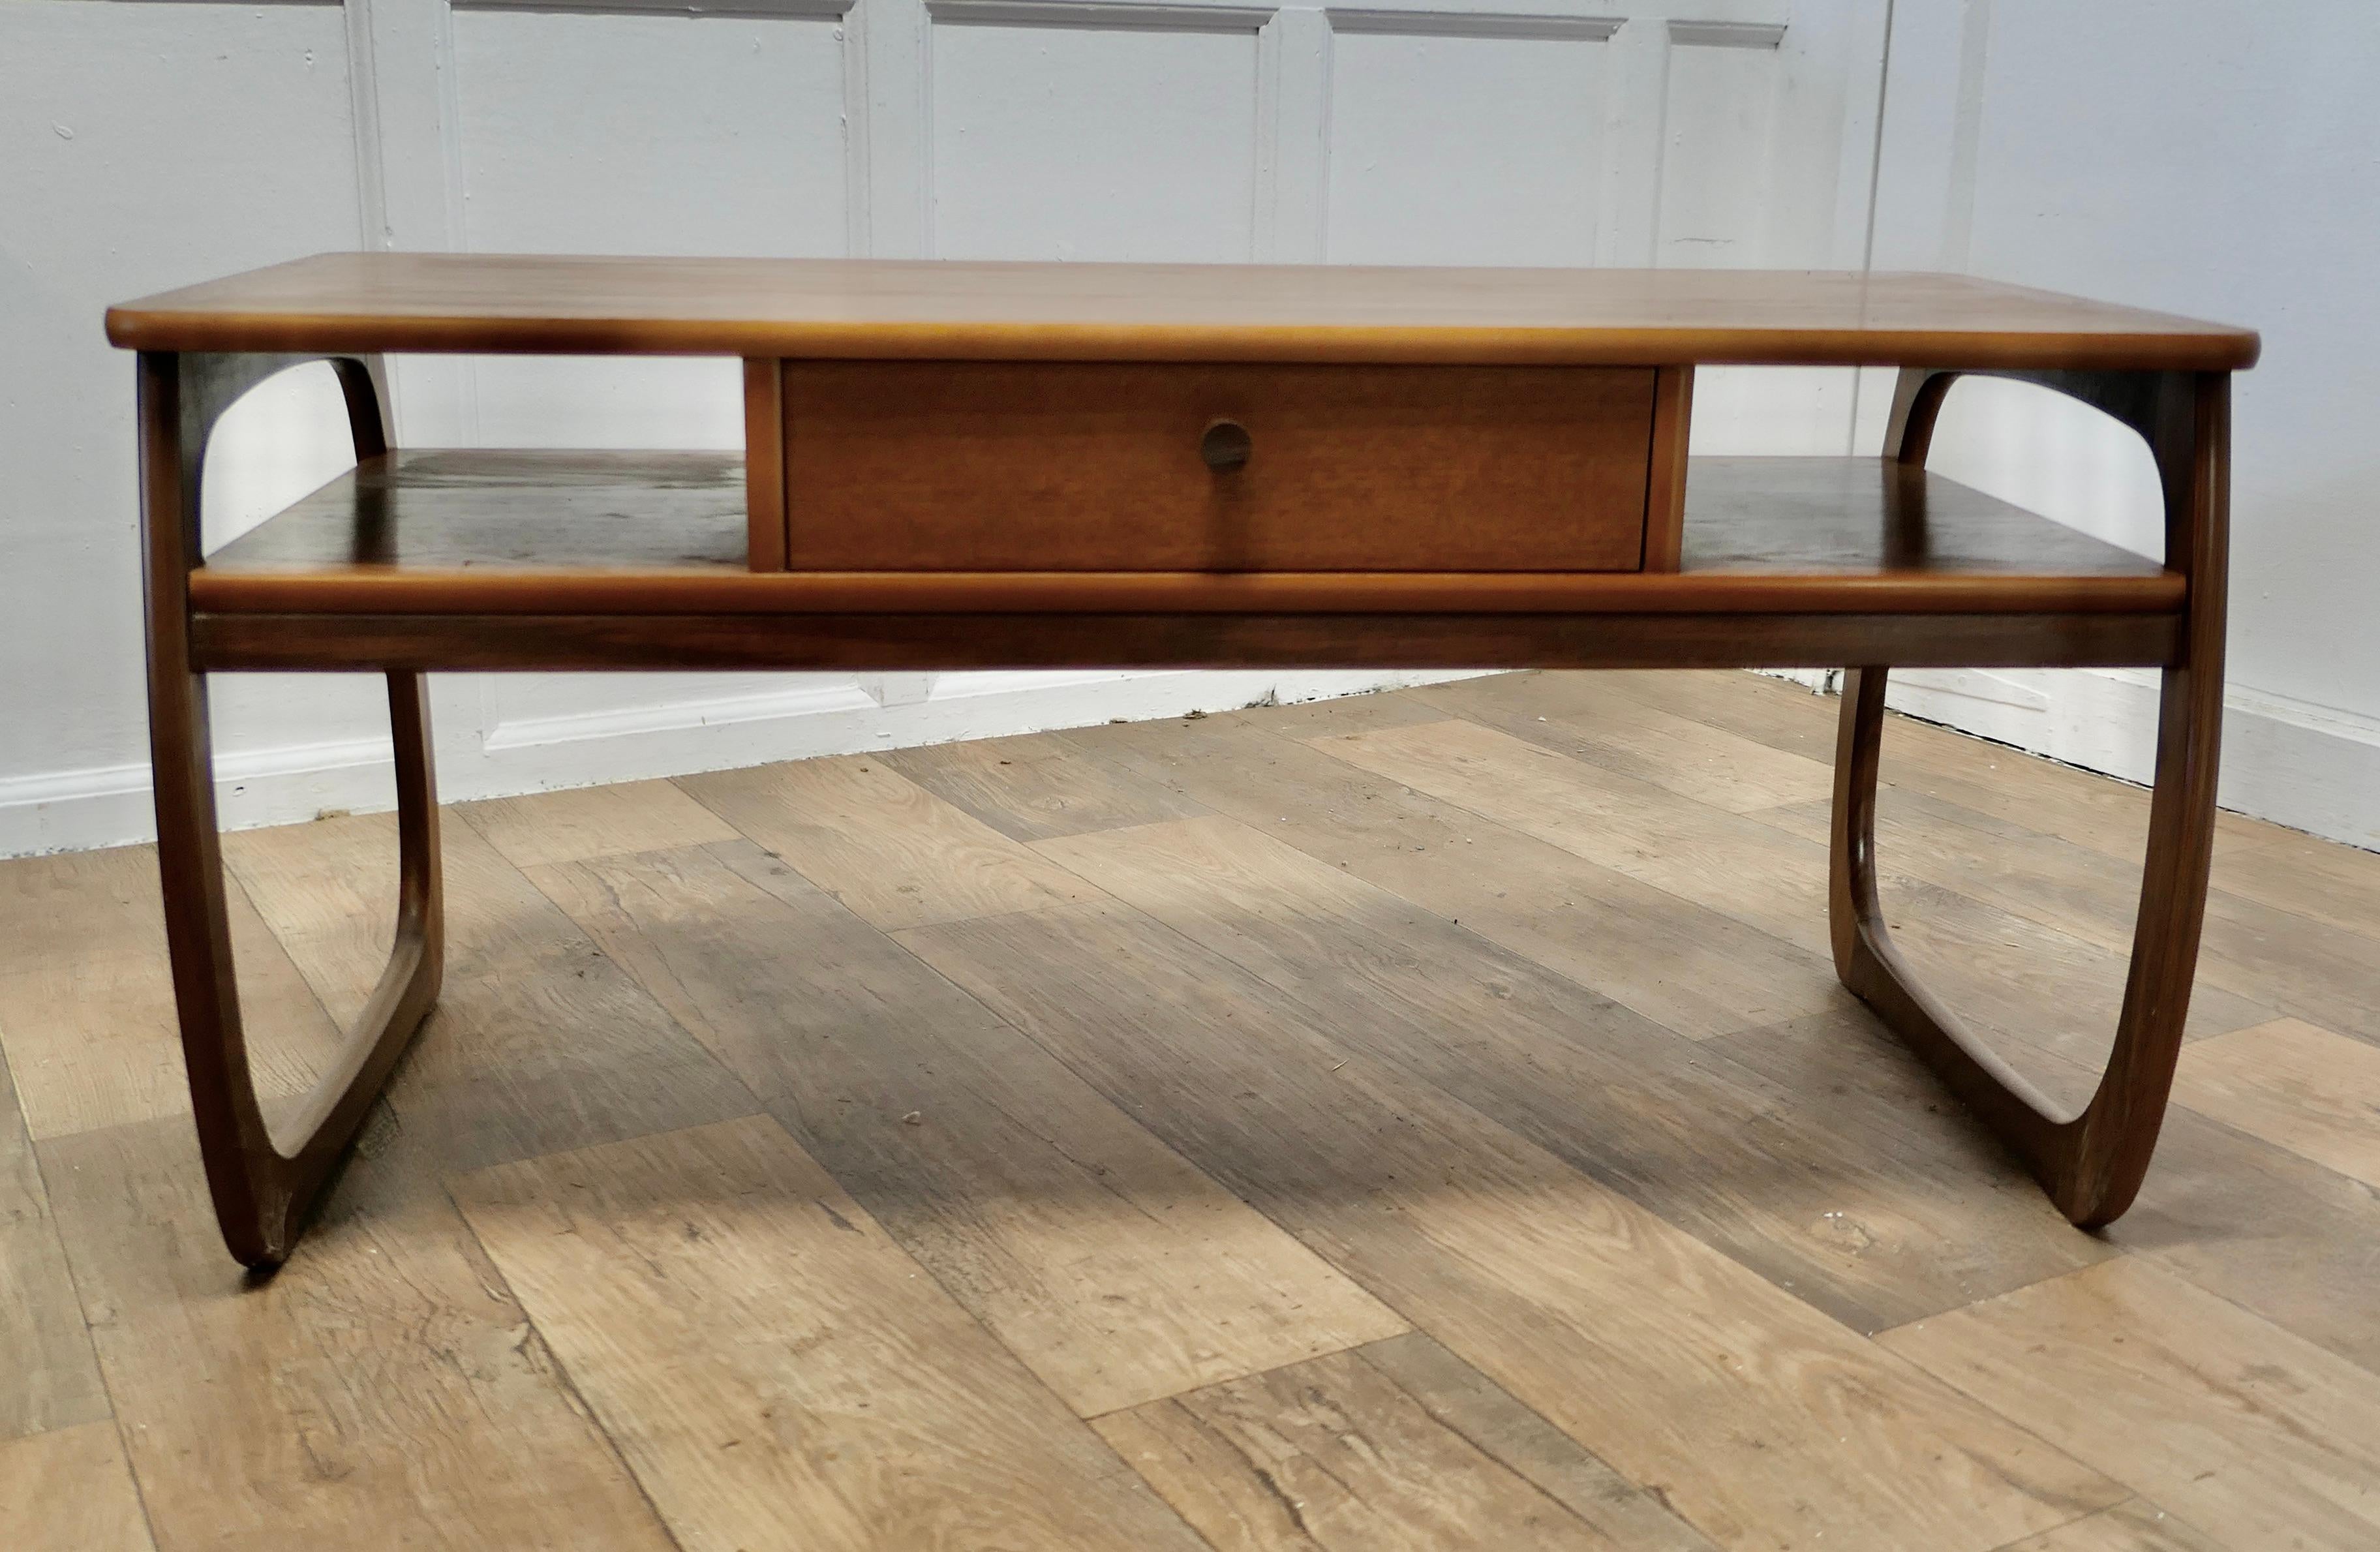 Long 1950s Parker Knoll Cube Shape Coffee Table

This is a good sturdy table, it has a very attractive Danish style double cube shape with bow sided legs
Beneath the rectangular top there is a central double sided drawer and magazine storage on